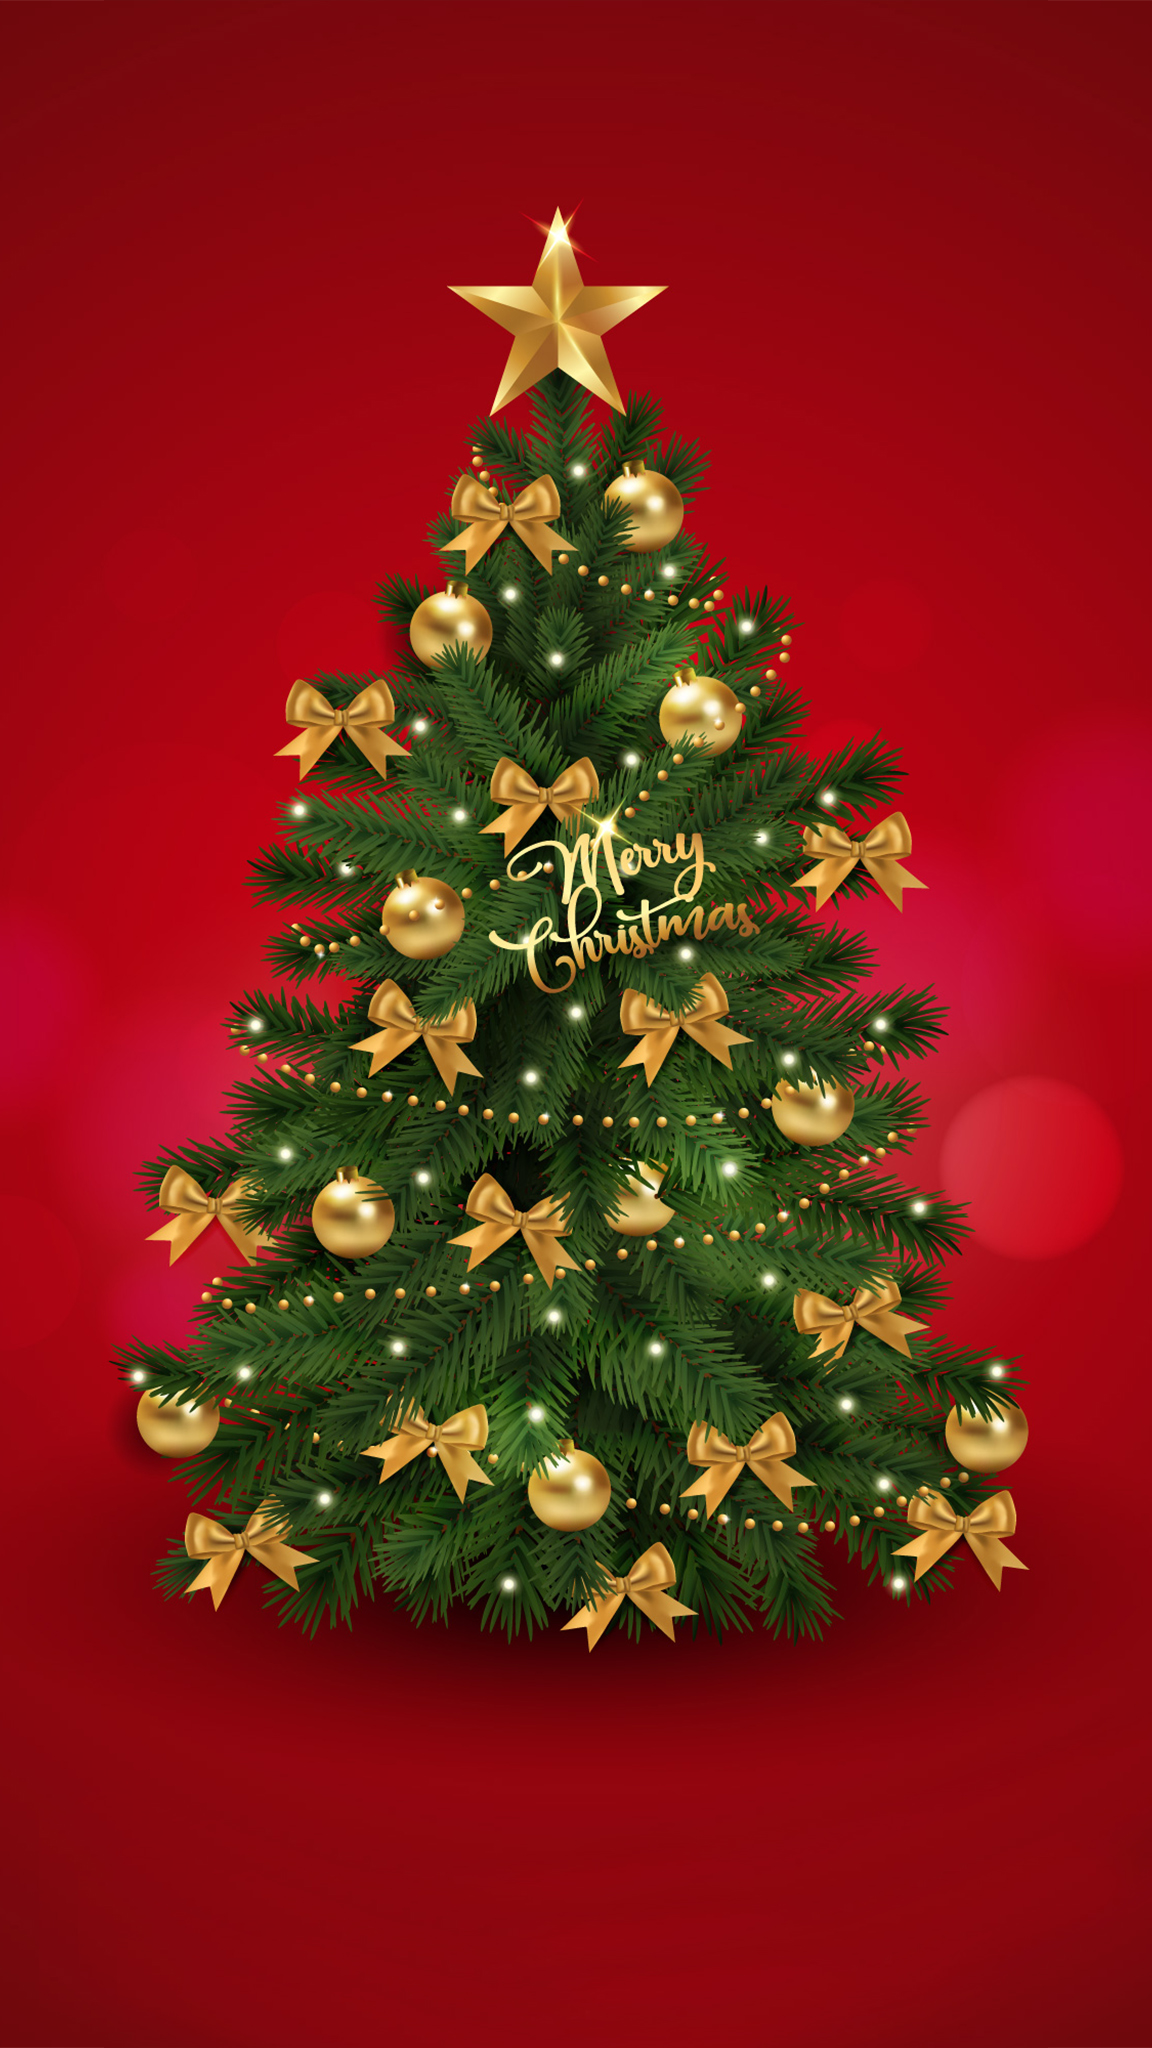 CHRISTMAS PHONE WALLPAPER COLLECTION 199